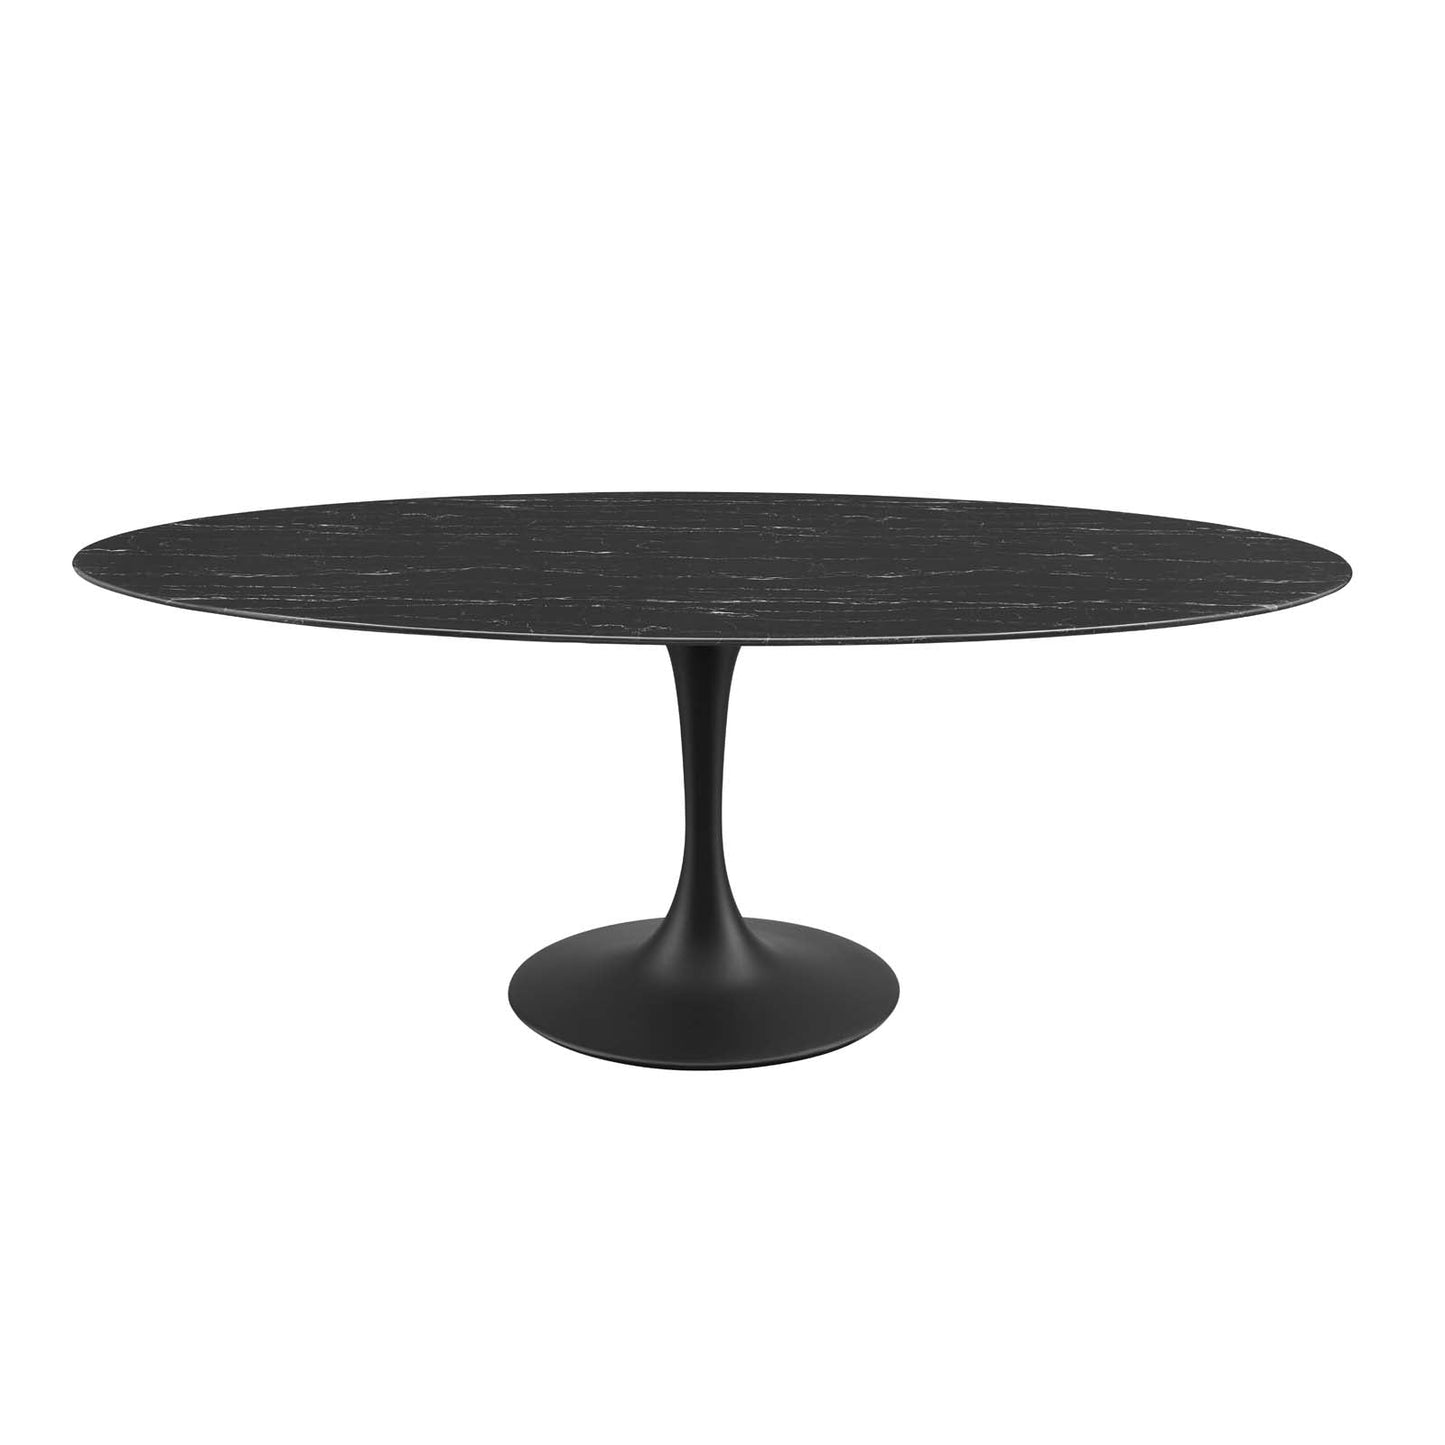 Tulip Style 78" Black Oval Artificial Marble Dining Table